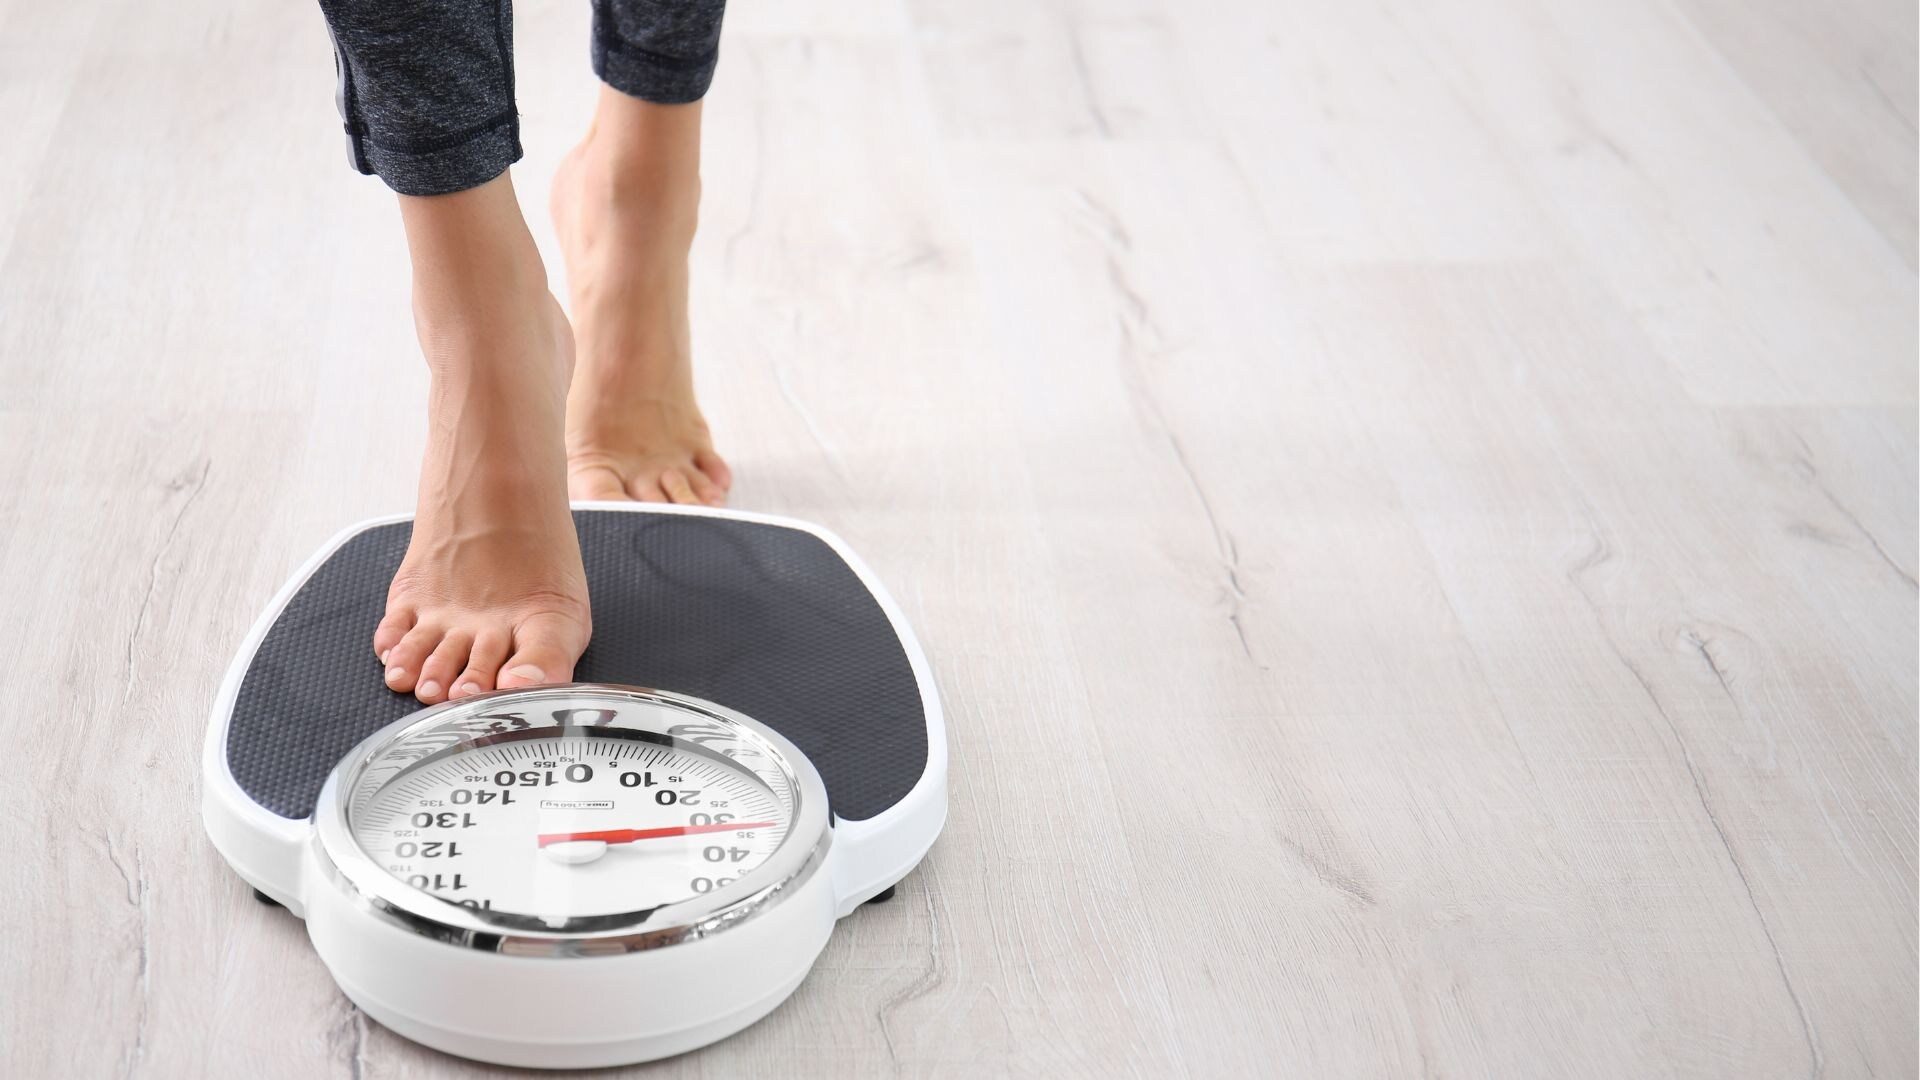 Mission: weight loss.  A dietitian advises how to lose 5 kilograms in 30 days